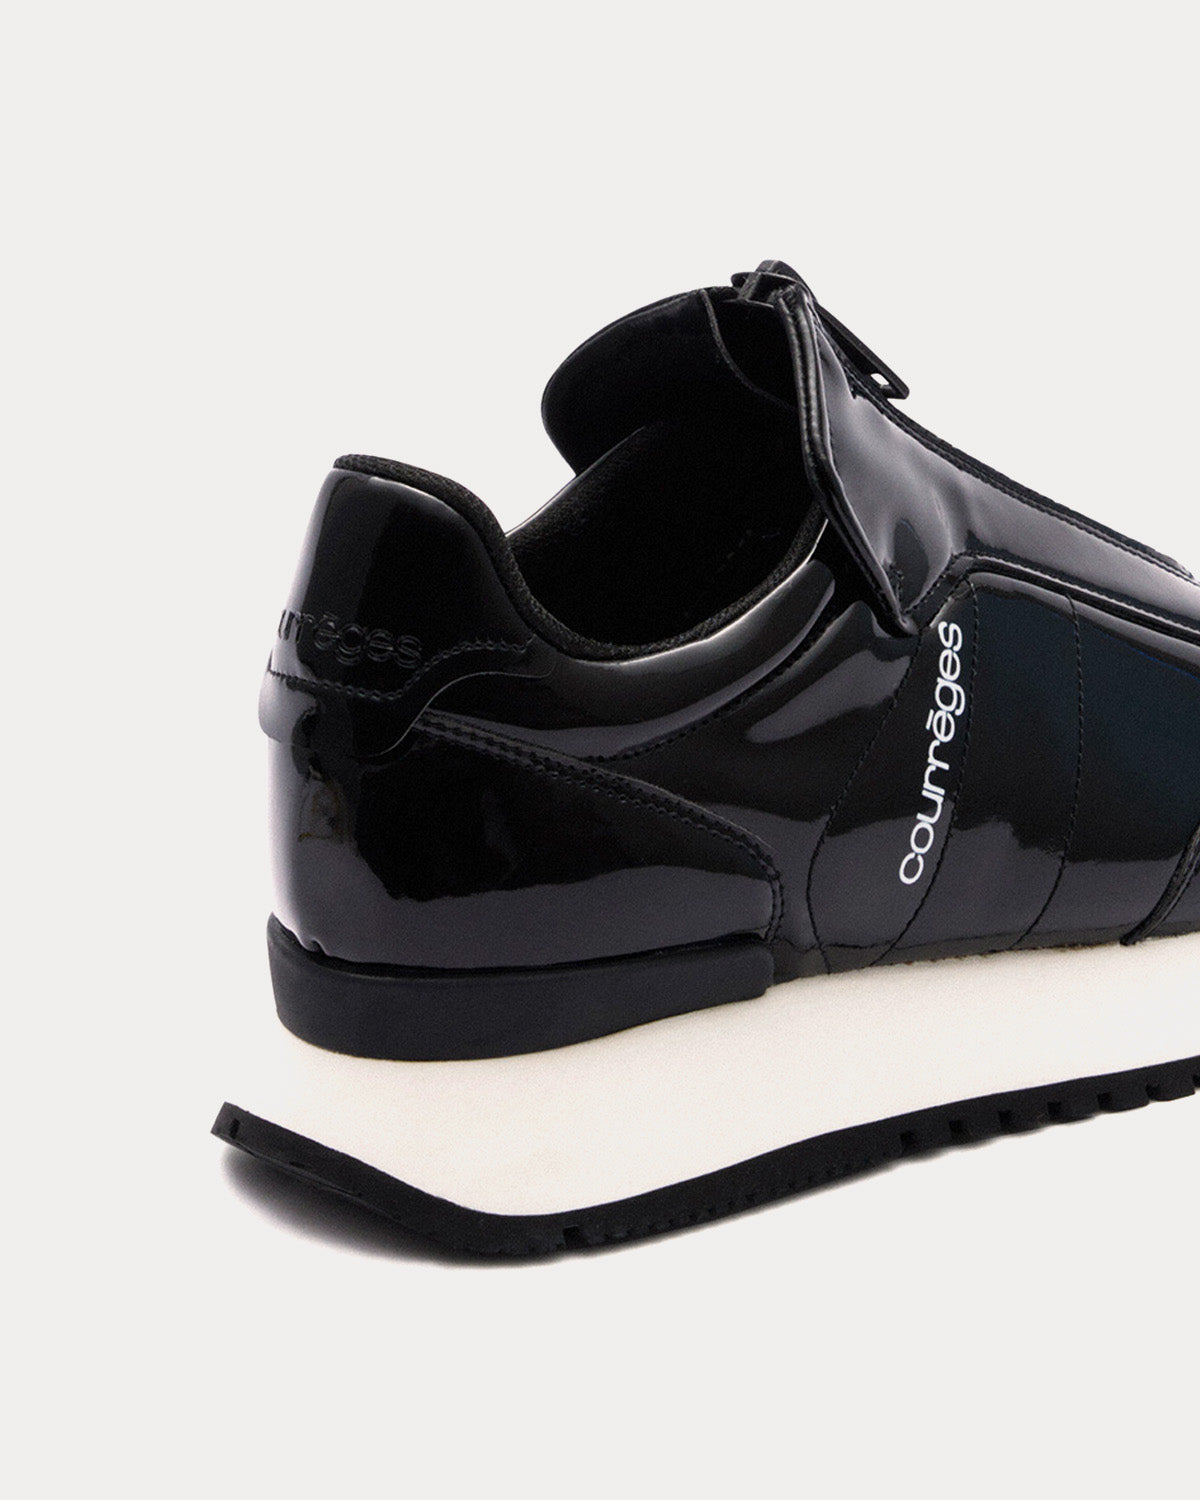 Courrèges - Zip Patent Leather Black Slip On Sneakers